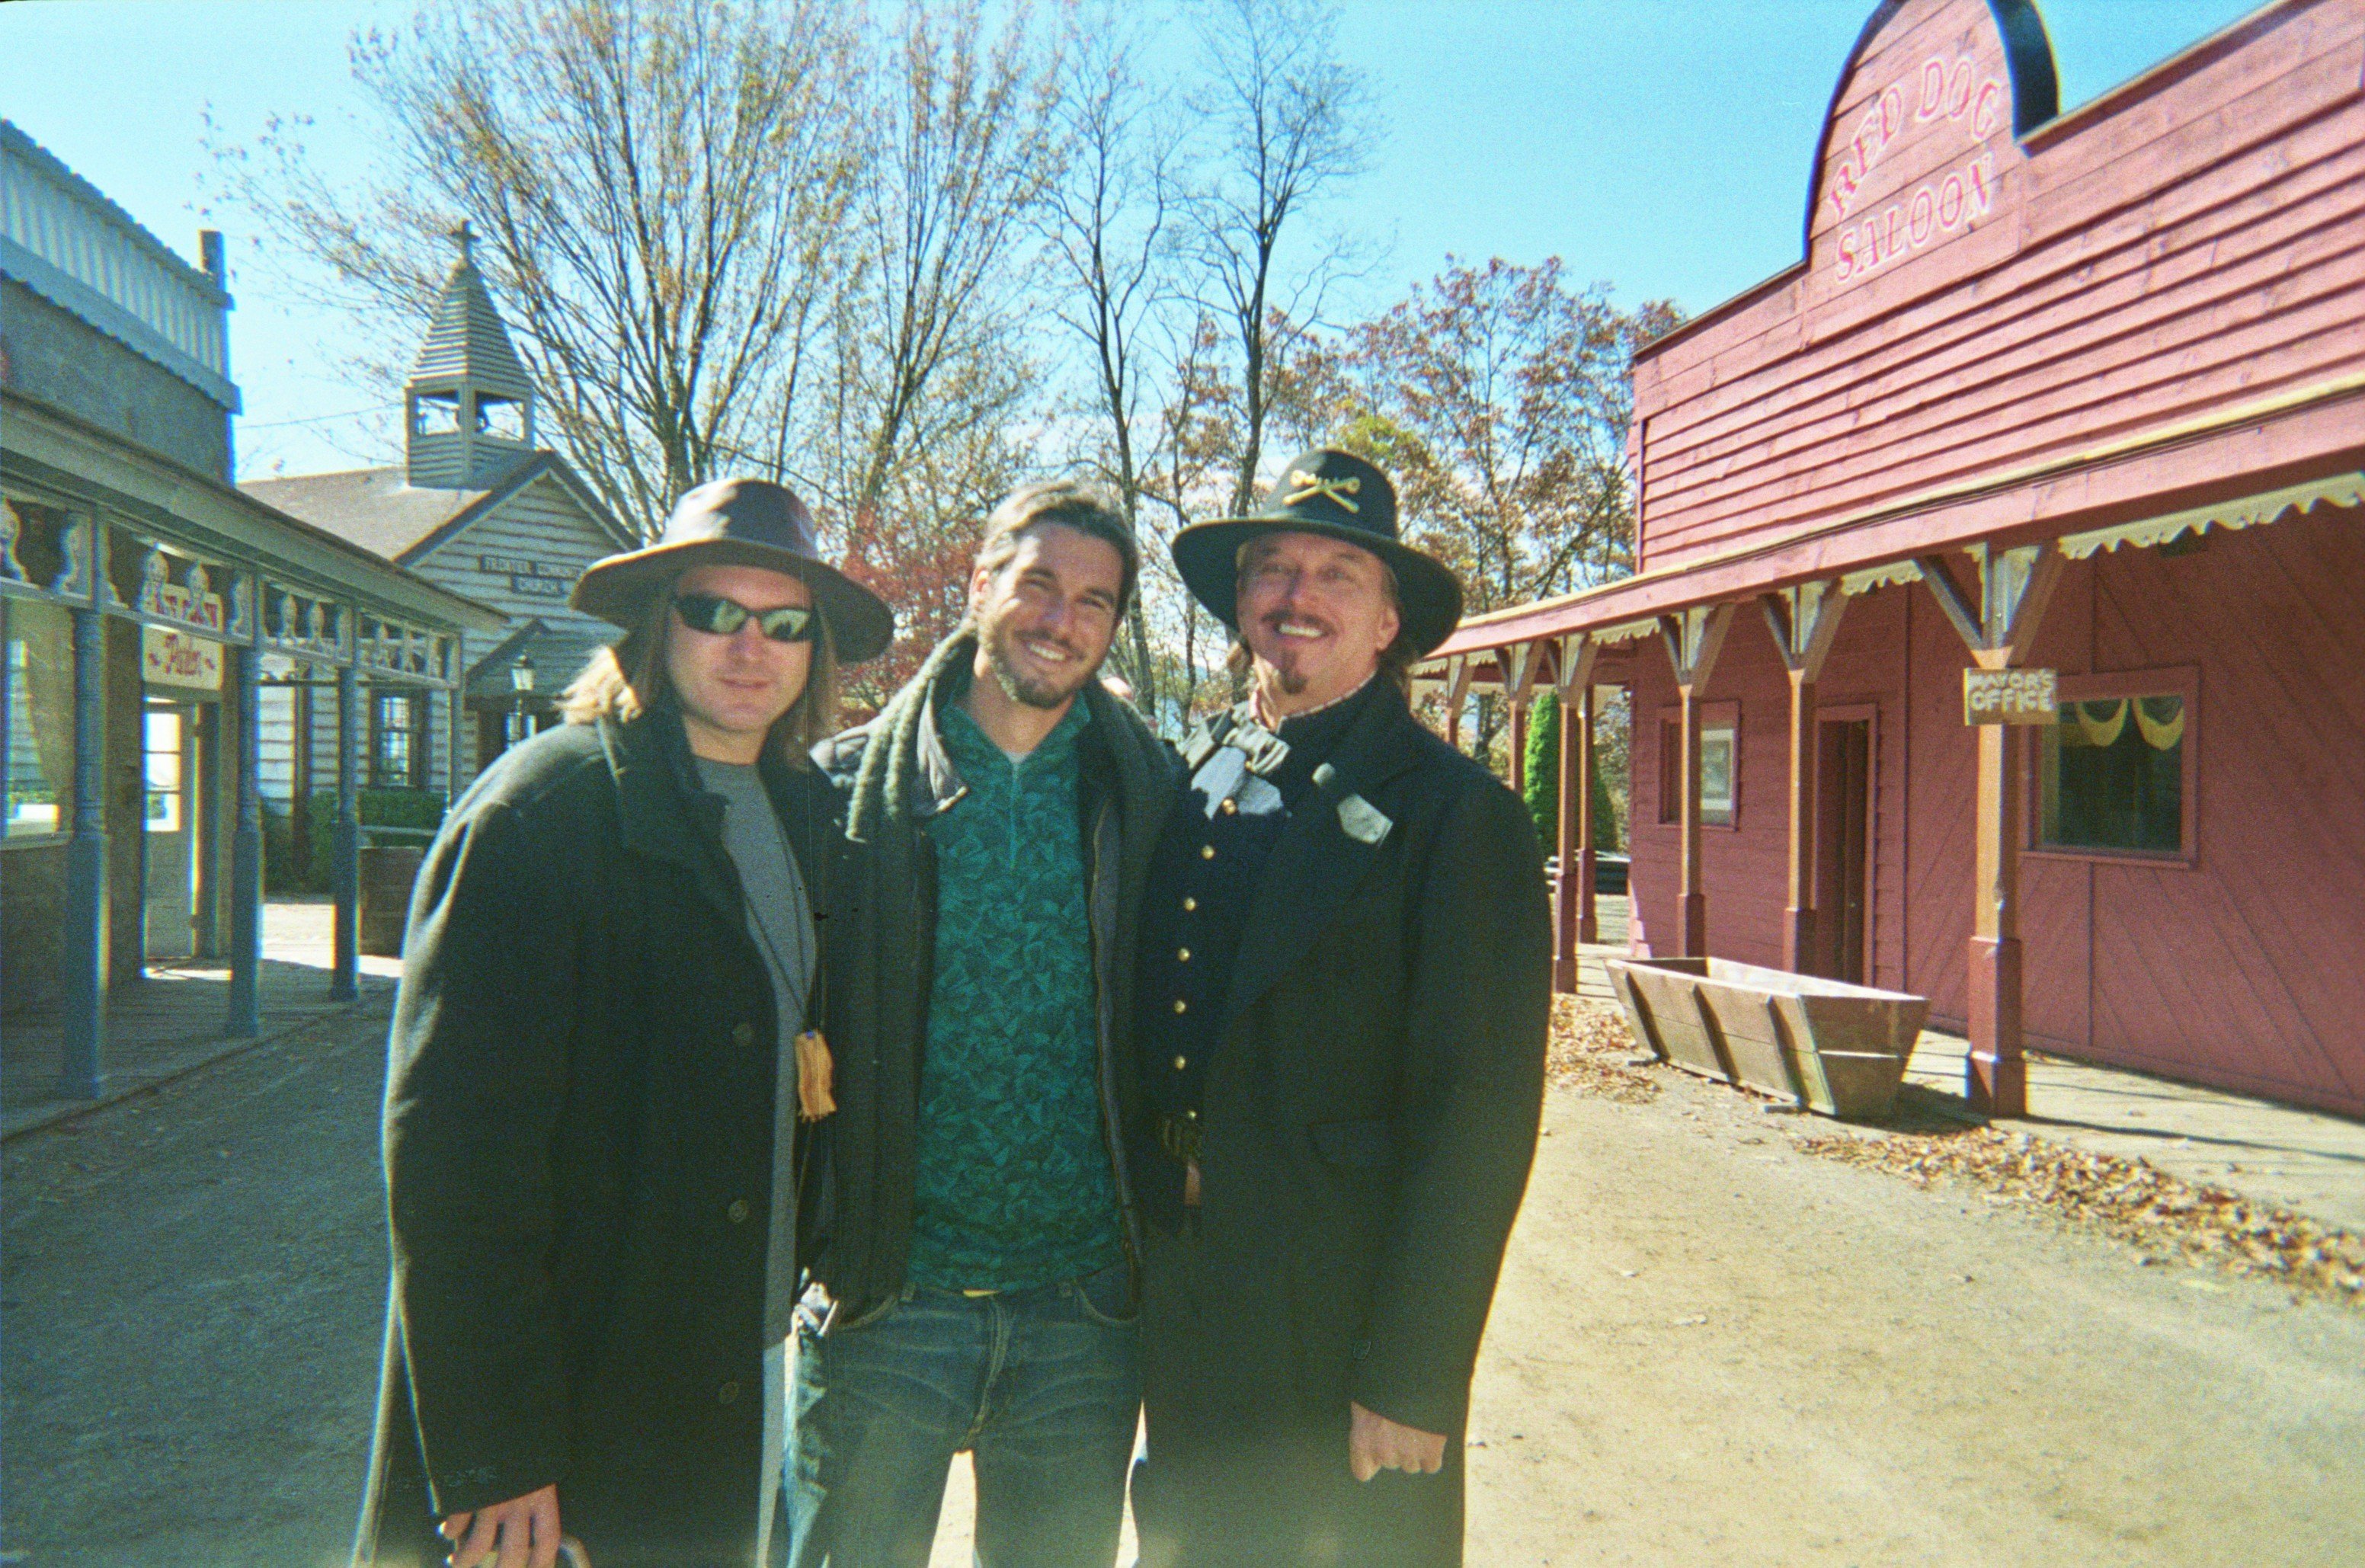 From left, actors DJ Perry (An Ordinary Killer, The 8th Plague, Miracle at Sage Creek), Jordan Engle (Zoey 101, Spring Break-Up) and Anthony Hornus (An Ordinary Killer, Miracle at Sage Creek, Heaven's Neighbors) on location in Maggie Valley, North Carolin